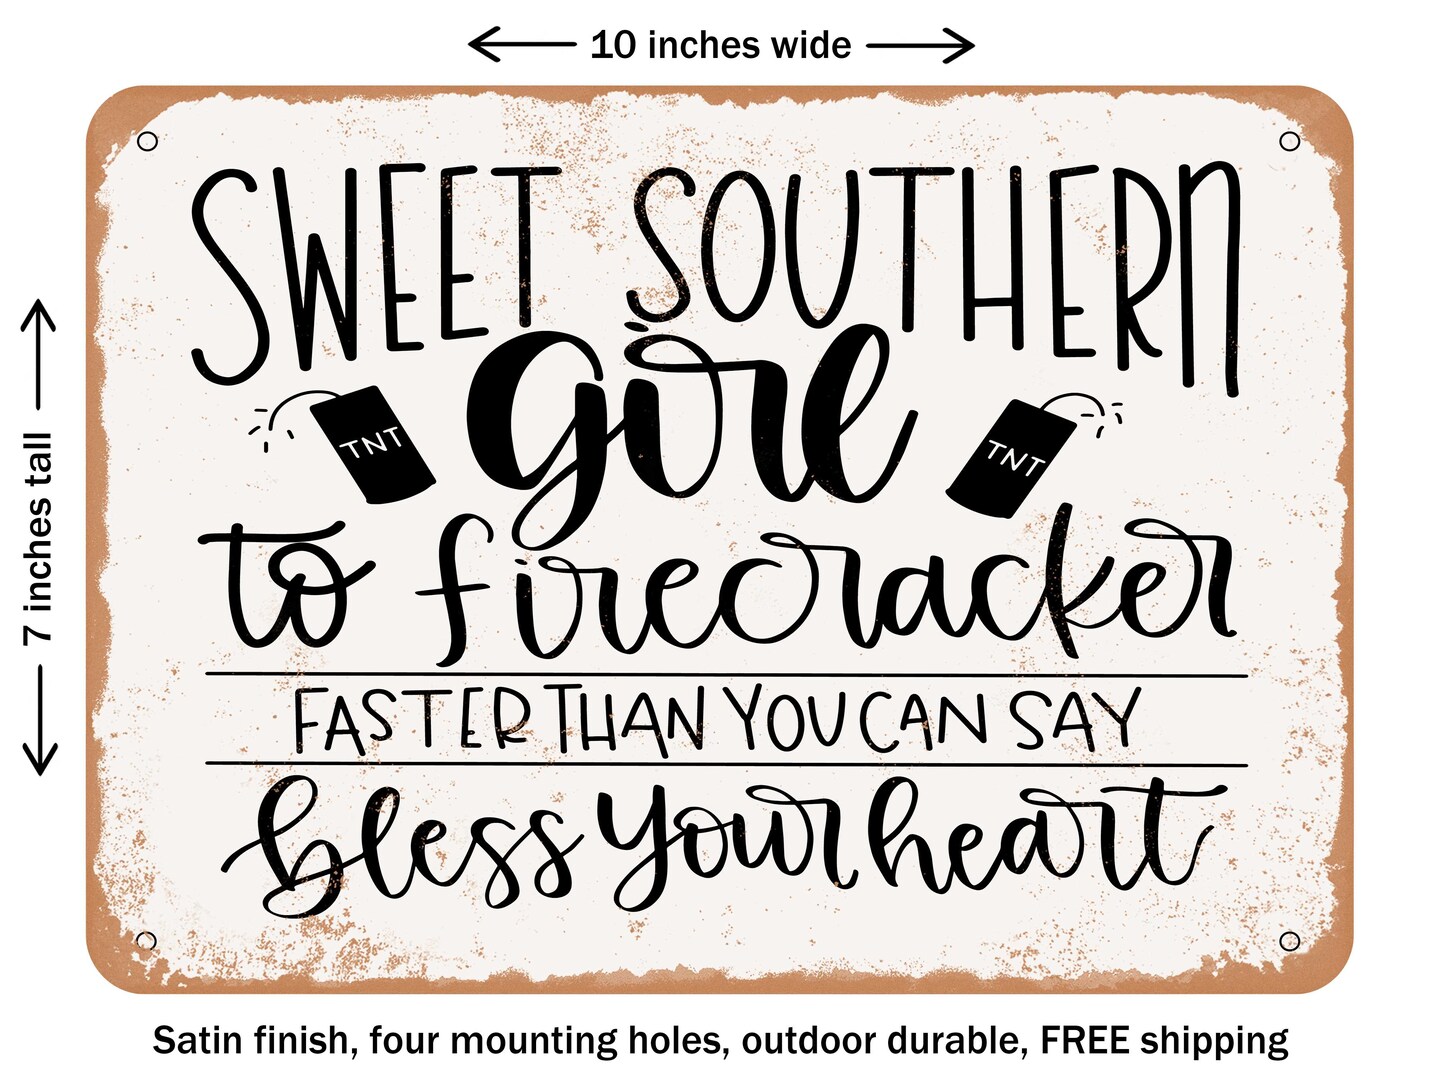 DECORATIVE METAL SIGN - Sweet Southern Girl - 2 - Vintage Rusty Look